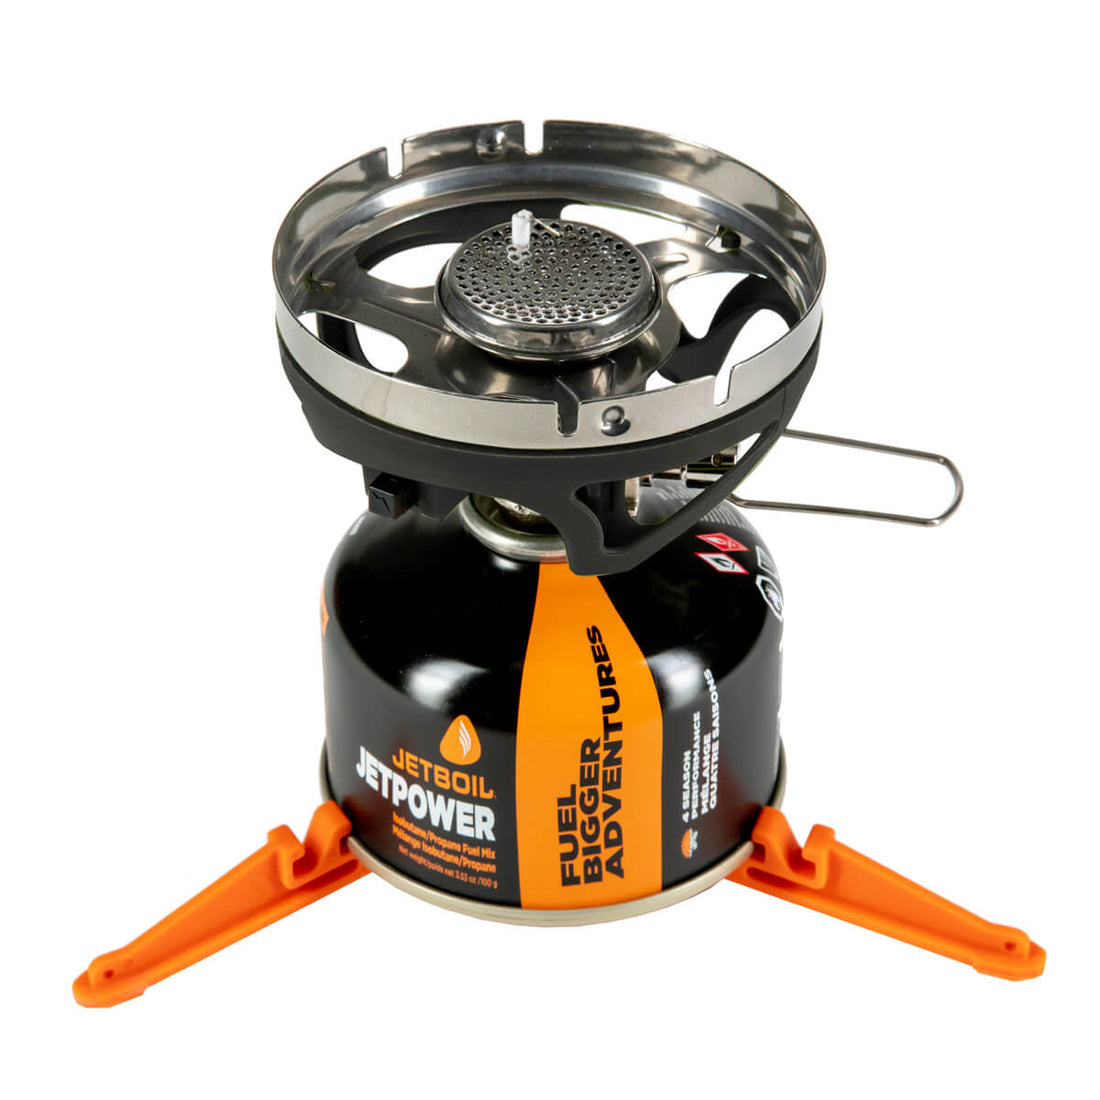 Supplies - Provisions - Eating Tools - Jetboil MiniMo Cooking System - Camo